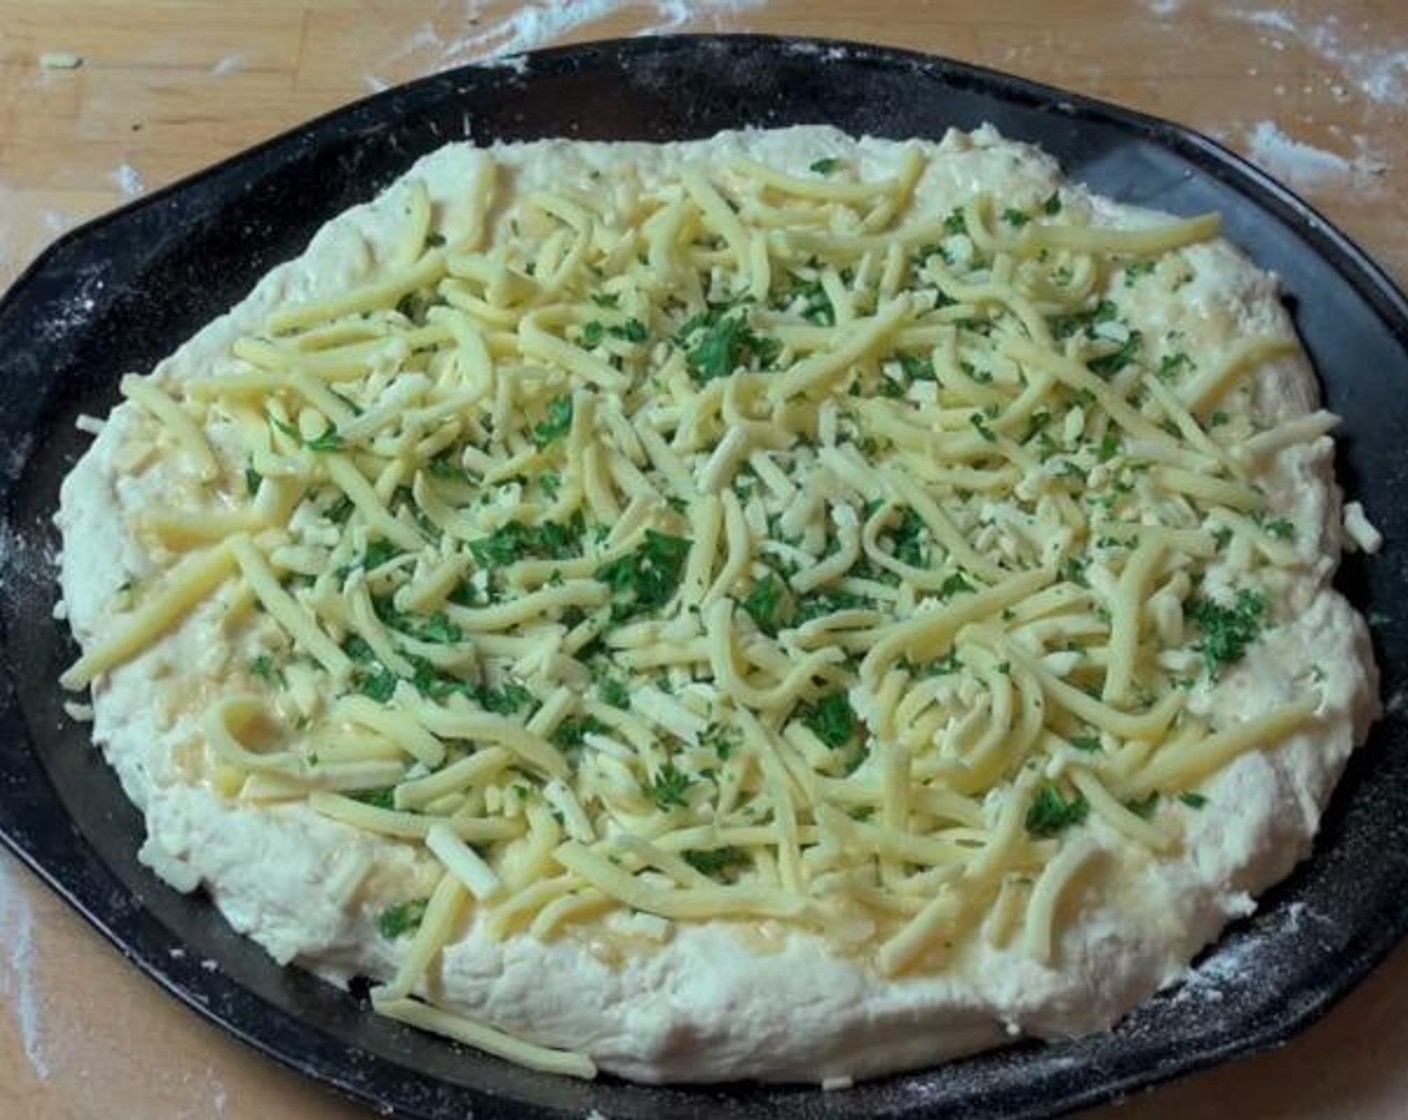 step 3 In a small cup, combine Olive Oil (1/4 cup) and Garlic (2 cloves). Spread mixture over the dough. Sprinkle Fresh Parsley (2 Tbsp) and Cheese (1 cup) over top.